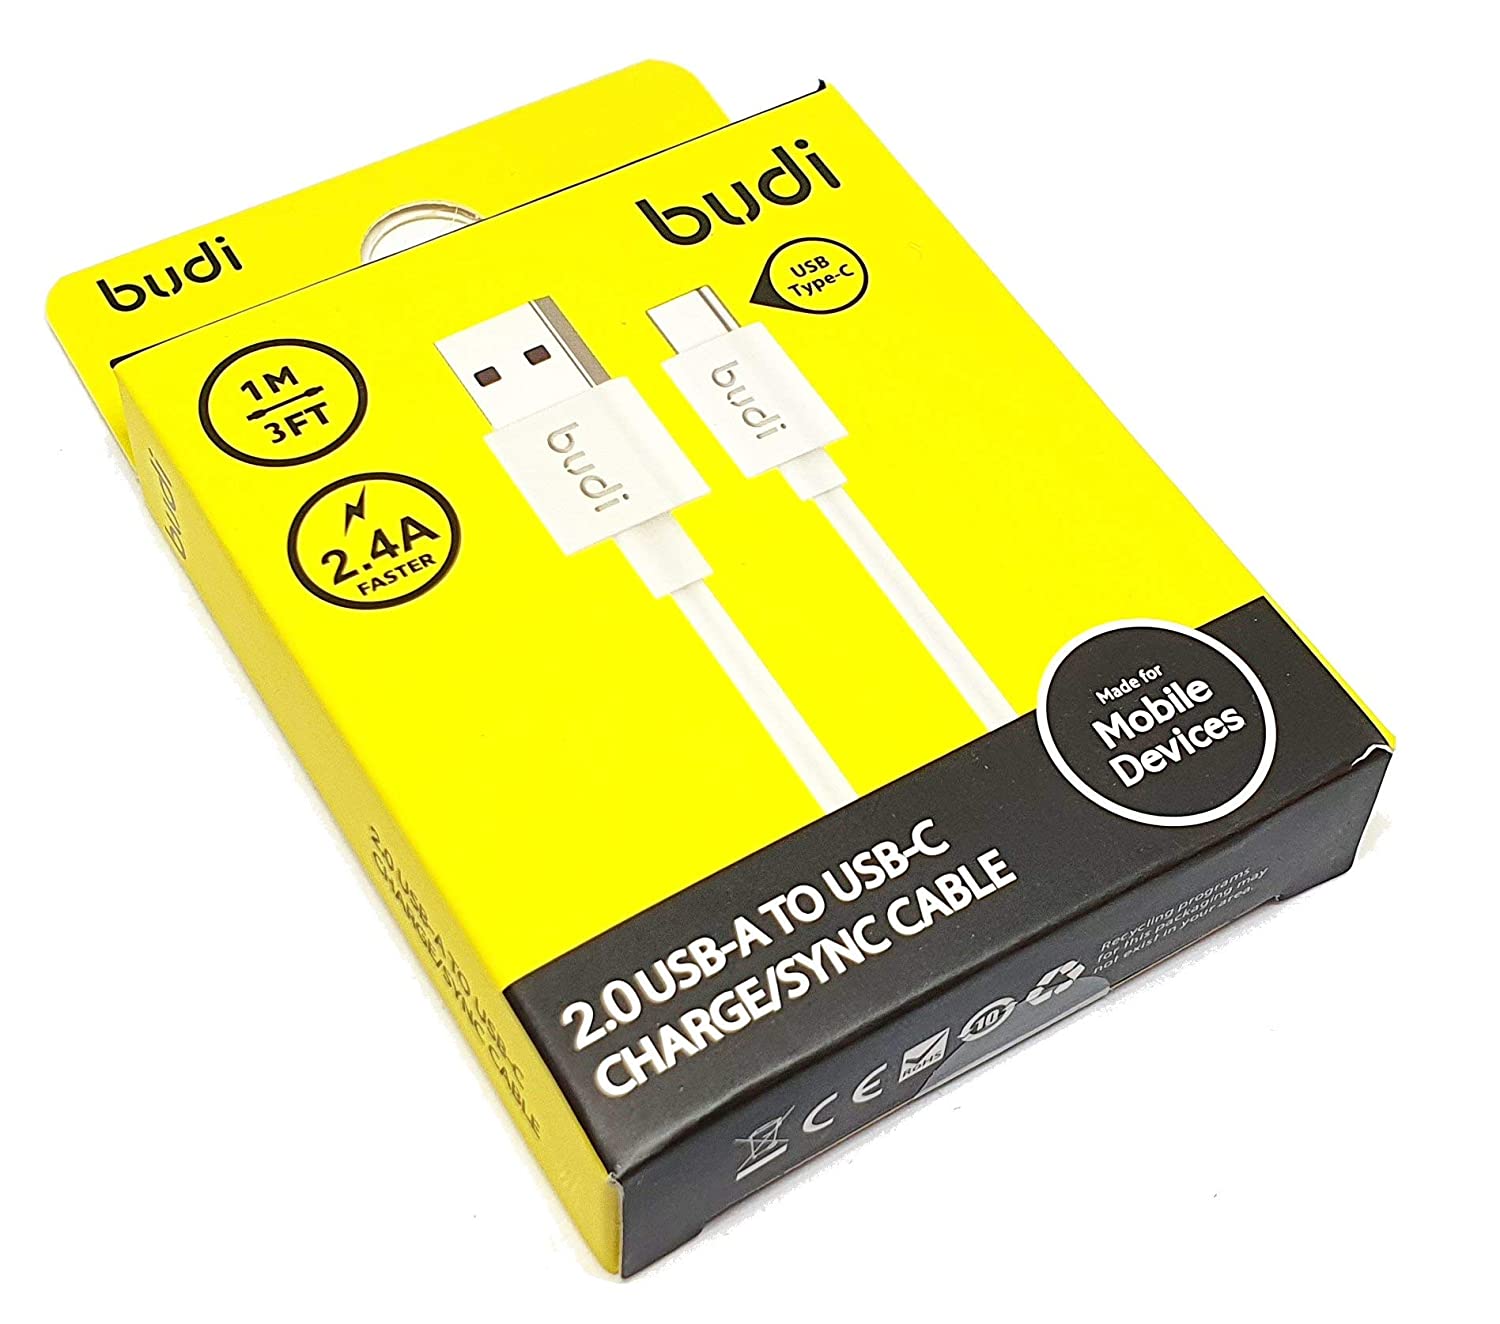 BUDI 2.0 USB-A To USB-C Charge cable 1.2 M